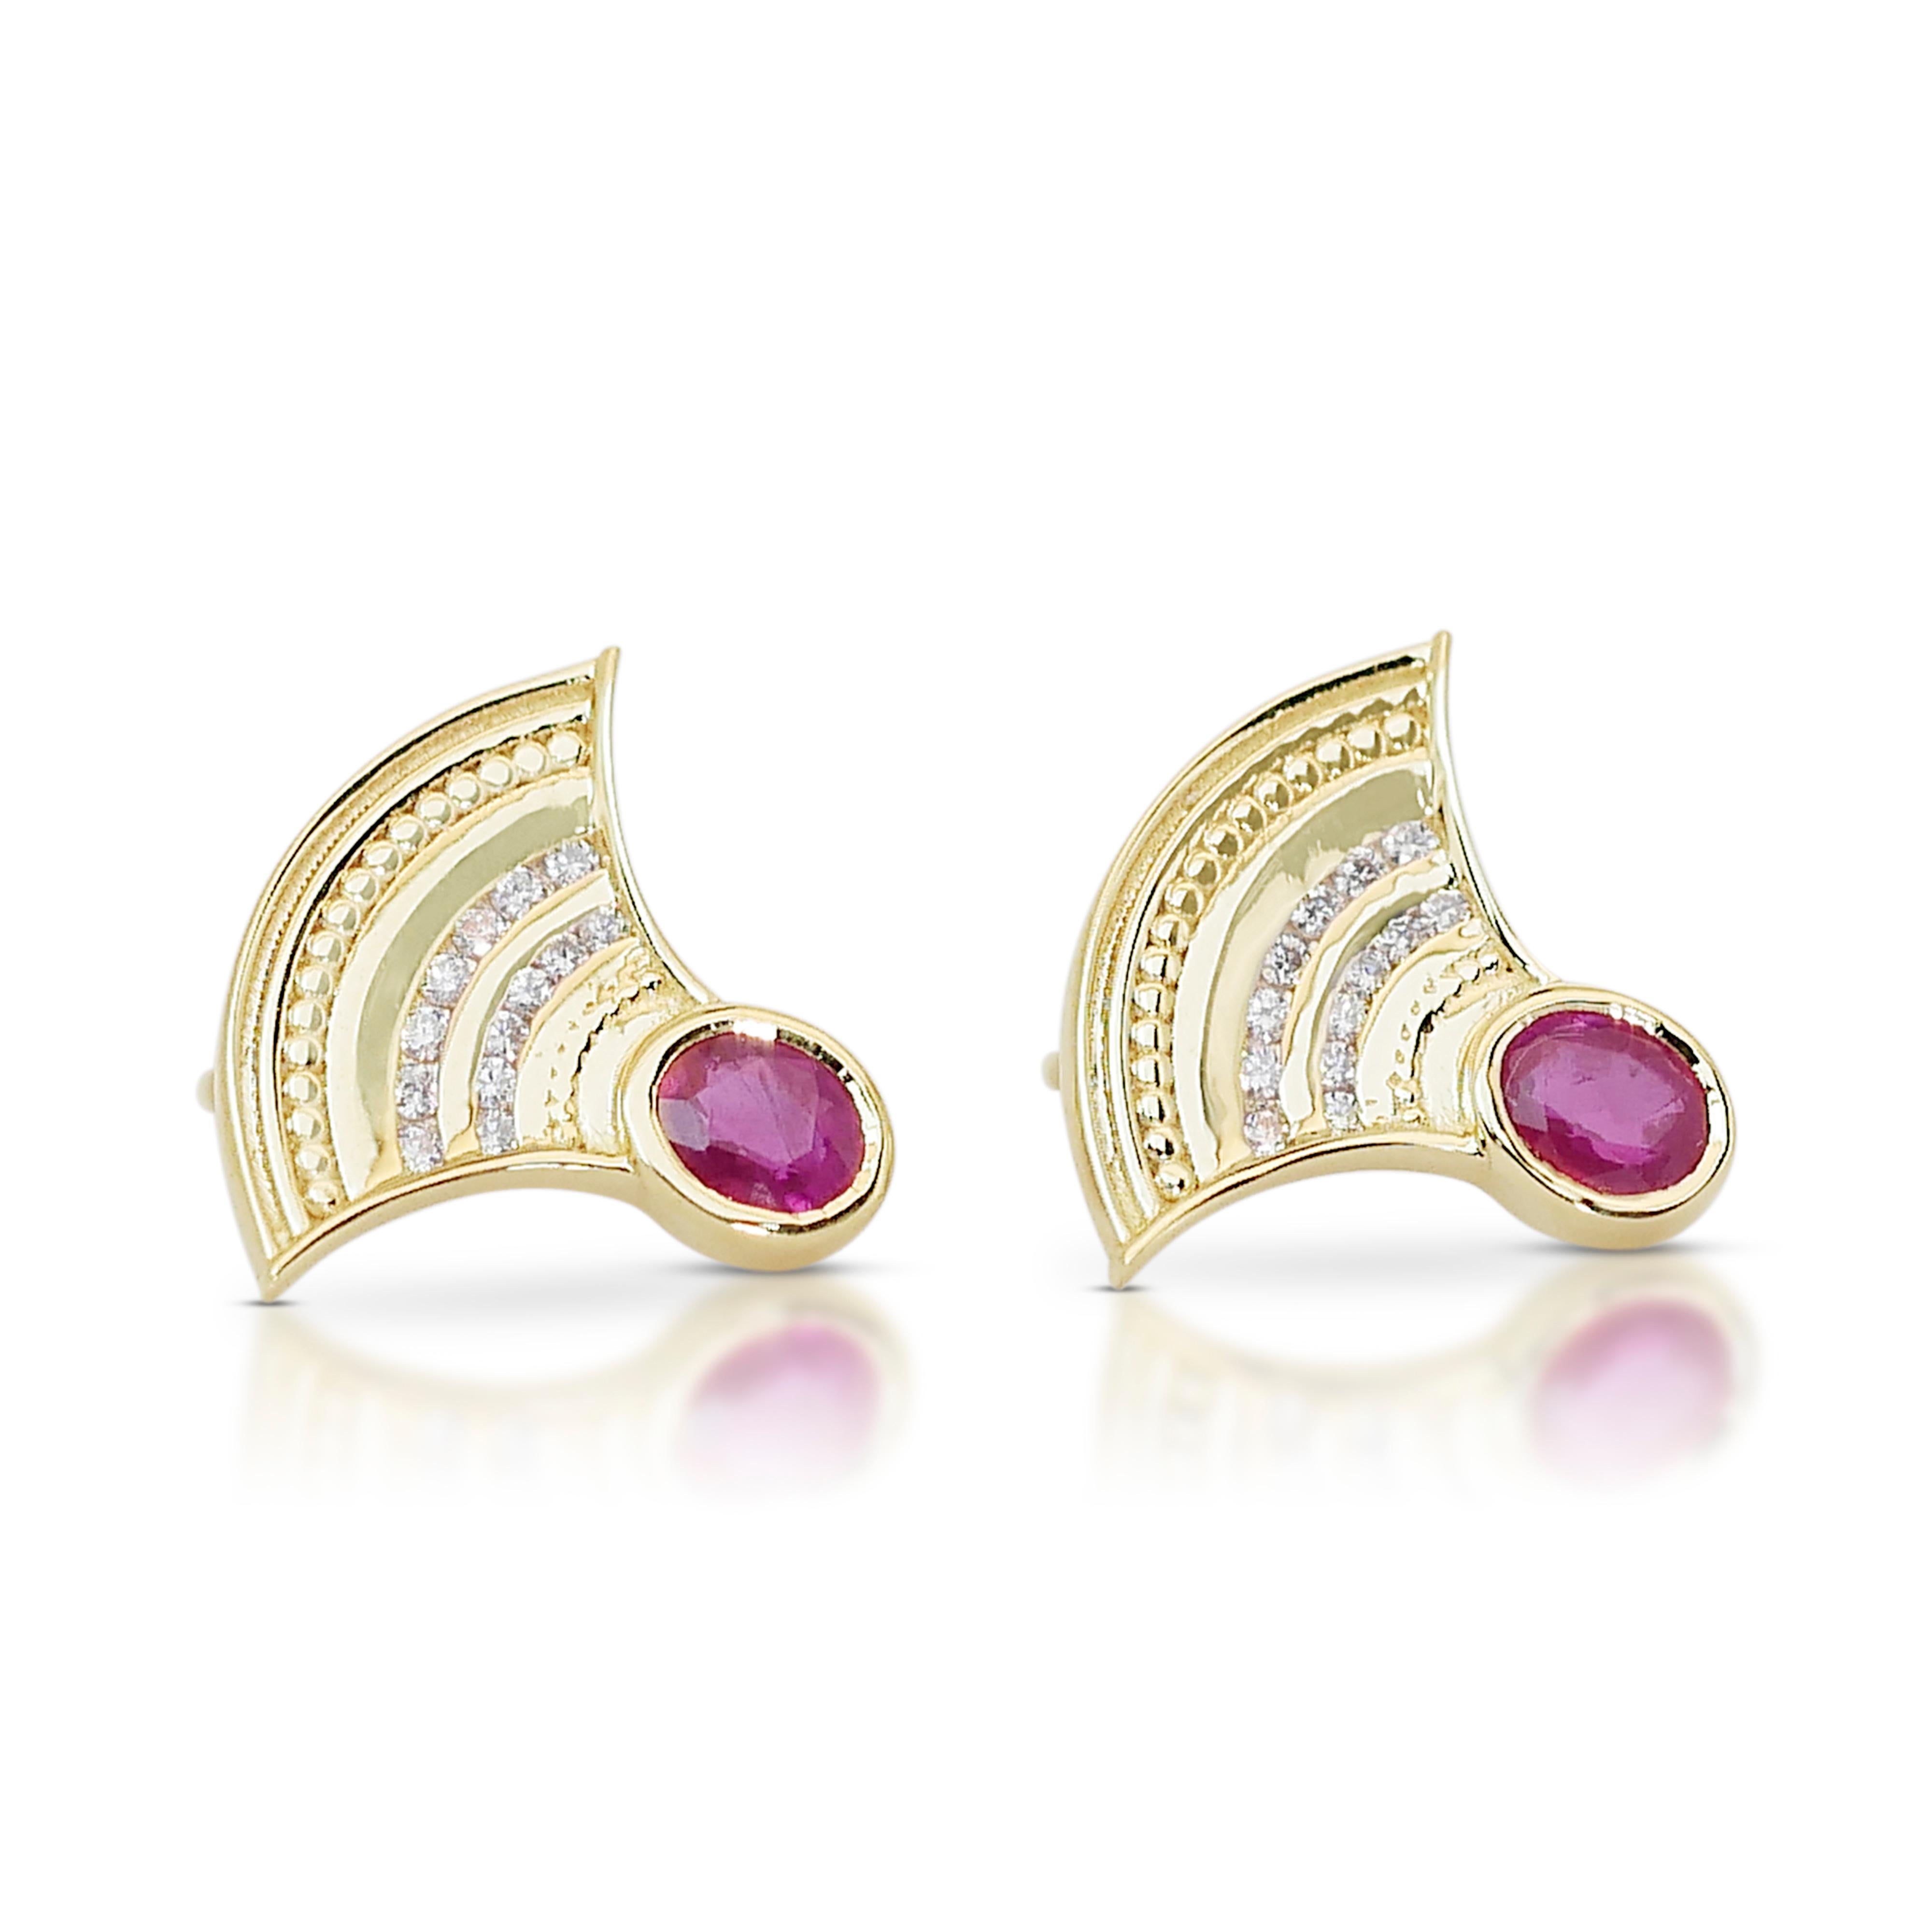 Women's Stunning 0.75ct Rubies and Diamonds Stud Earrings in 14k Yellow Gold - AIG  For Sale